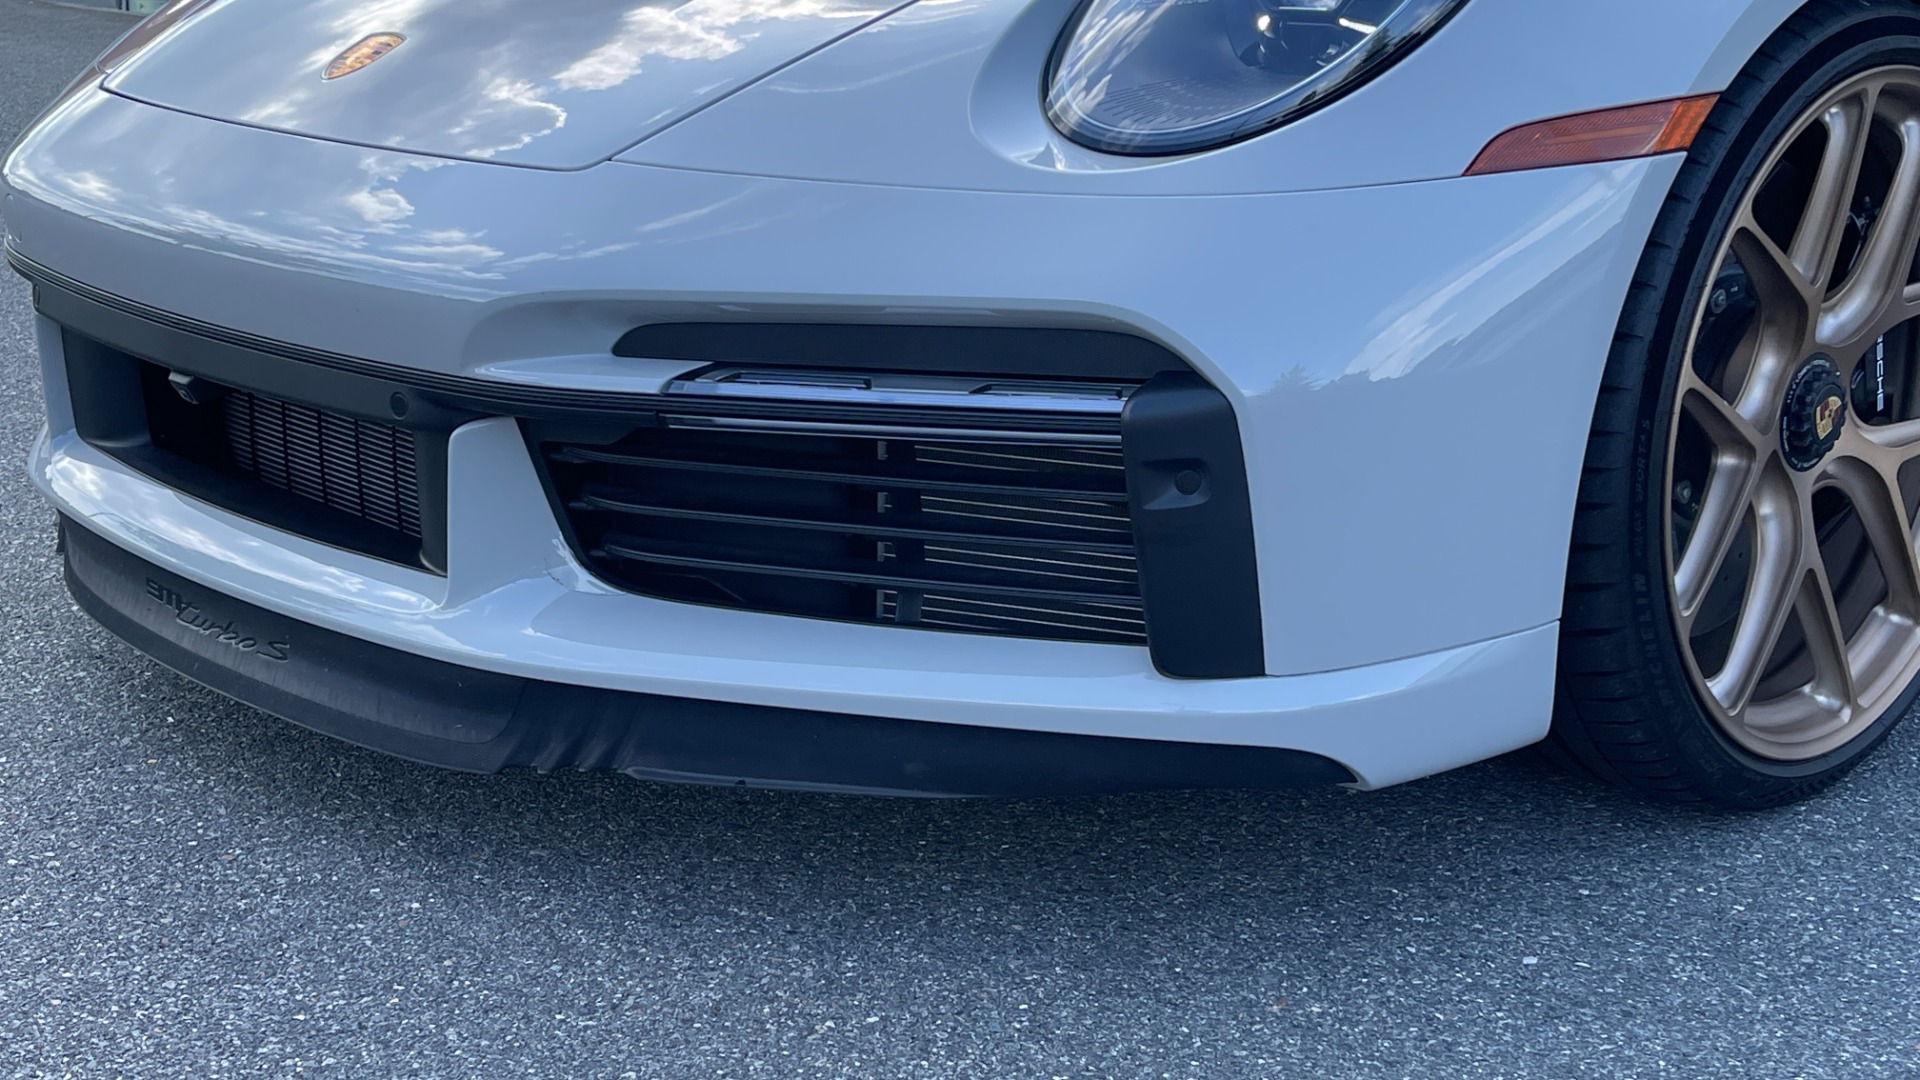 Used 2021 Porsche 911 Turbo S / HRE WHEELS / FRONT LIFT / MATRIX LIGHTS / PASM SUSPENSION for sale Sold at Formula Imports in Charlotte NC 28227 12